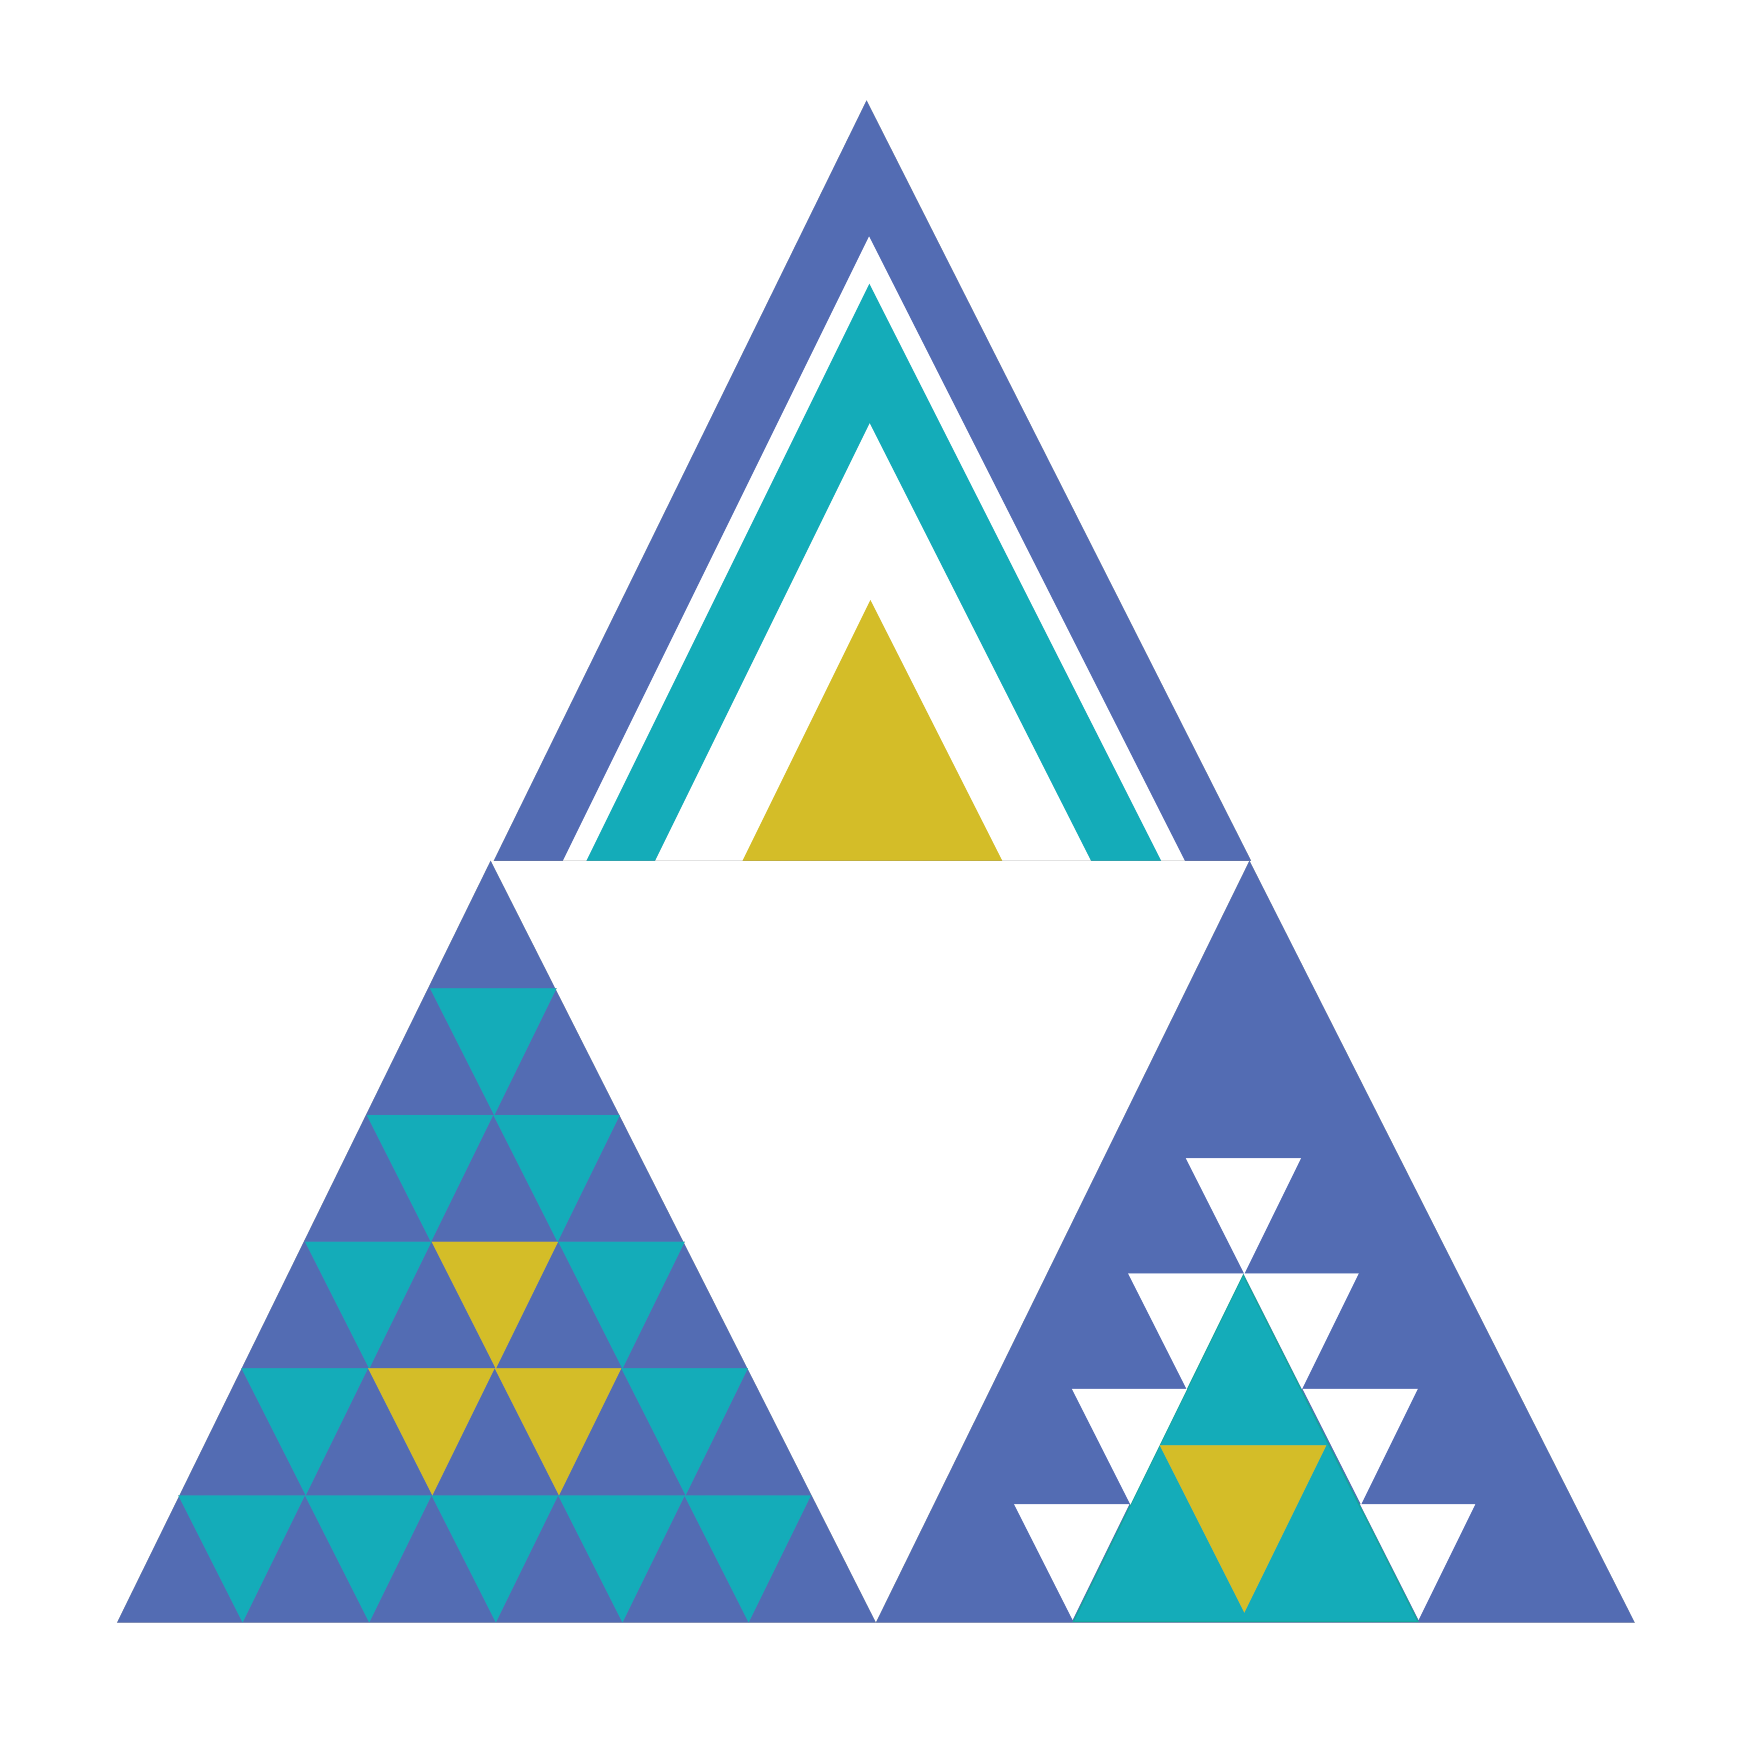 Three triangles designed as logos for each of global identity, global connections, and global responsibility